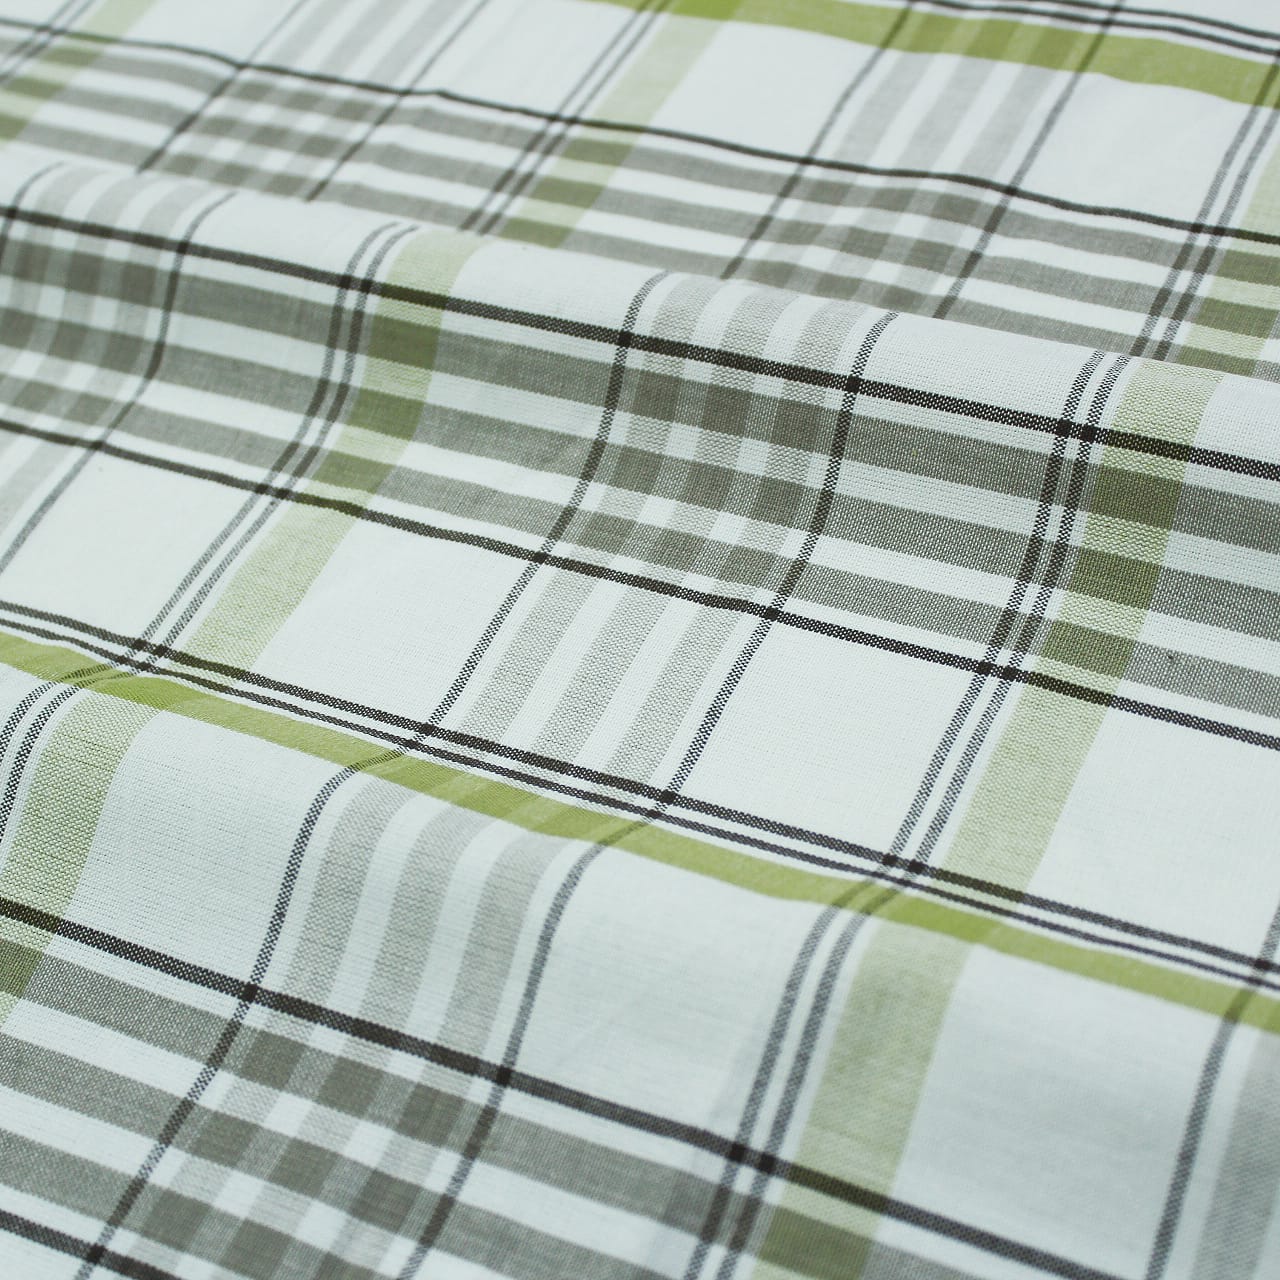 Alpha Green Woven Cotton Check Table Cover(1 Pc) online in India